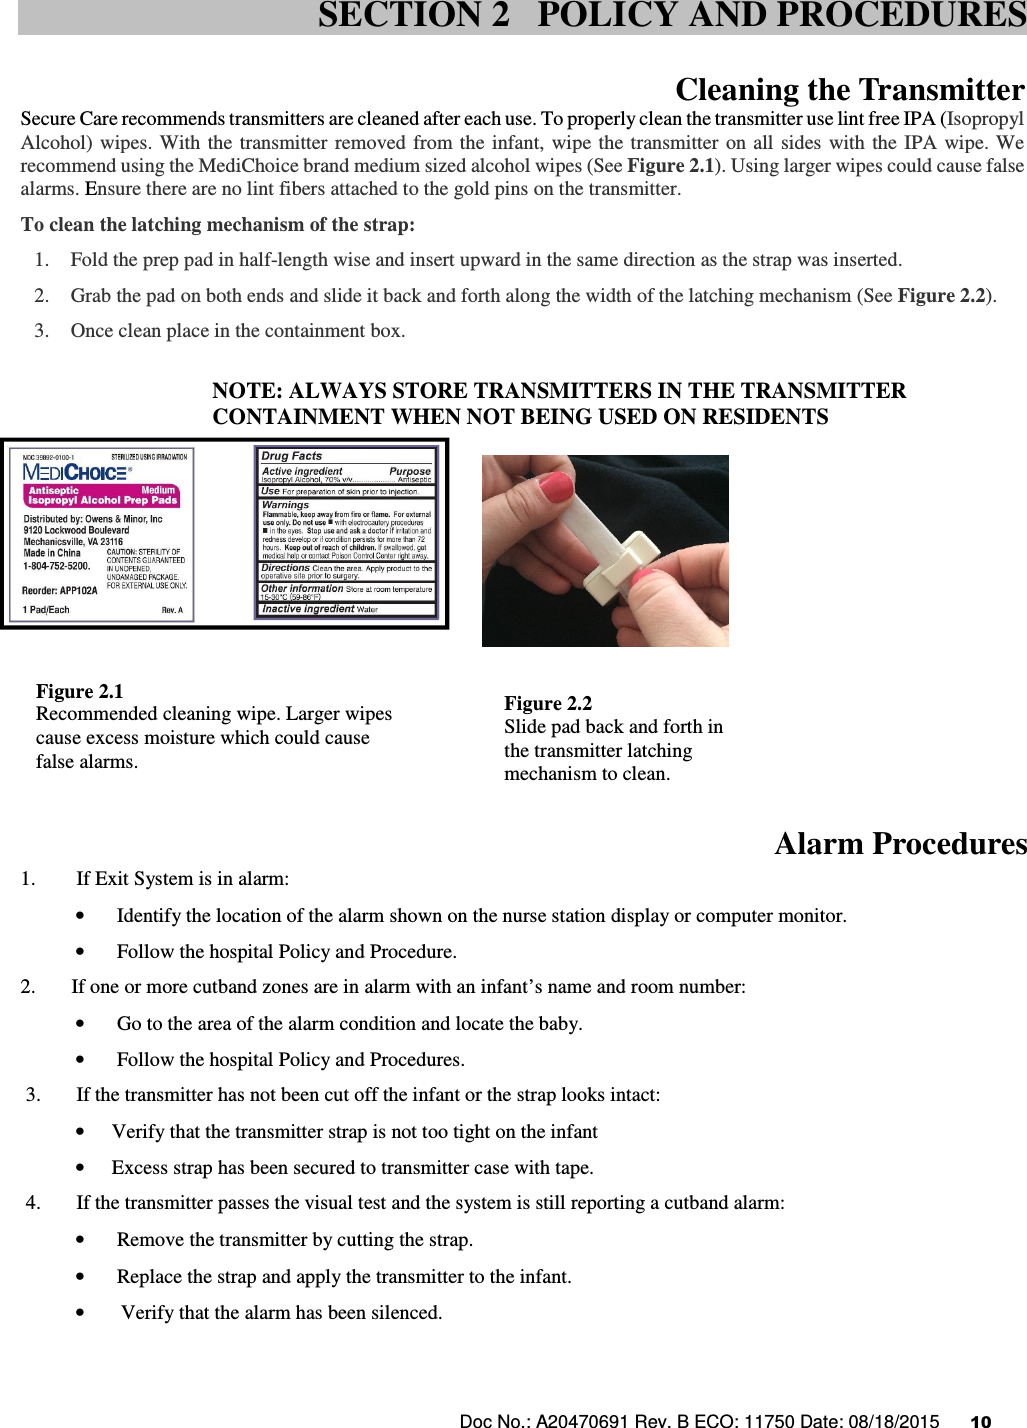 Doc No.: A20470691 Rev. B ECO: 11750 Date: 08/18/2015      10                Cleaning the Transmitter  Secure Care recommends transmitters are cleaned after each use. To properly clean the transmitter use lint free IPA (Isopropyl Alcohol)  wipes. With  the transmitter removed  from  the infant, wipe the transmitter  on  all sides  with  the IPA wipe. We recommend using the MediChoice brand medium sized alcohol wipes (See Figure 2.1). Using larger wipes could cause false alarms. Ensure there are no lint fibers attached to the gold pins on the transmitter.  To clean the latching mechanism of the strap: 1. Fold the prep pad in half-length wise and insert upward in the same direction as the strap was inserted. 2. Grab the pad on both ends and slide it back and forth along the width of the latching mechanism (See Figure 2.2). 3. Once clean place in the containment box.  NOTE: ALWAYS STORE TRANSMITTERS IN THE TRANSMITTER CONTAINMENT WHEN NOT BEING USED ON RESIDENTS              Alarm Procedures 1.        If Exit System is in alarm: •  Identify the location of the alarm shown on the nurse station display or computer monitor.  •  Follow the hospital Policy and Procedure. 2.        If one or more cutband zones are in alarm with an infant’s name and room number: •  Go to the area of the alarm condition and locate the baby. •  Follow the hospital Policy and Procedures.  3.       If the transmitter has not been cut off the infant or the strap looks intact:  • Verify that the transmitter strap is not too tight on the infant • Excess strap has been secured to transmitter case with tape.  4.       If the transmitter passes the visual test and the system is still reporting a cutband alarm: •  Remove the transmitter by cutting the strap. •  Replace the strap and apply the transmitter to the infant. • Verify that the alarm has been silenced.     SECTION 2   POLICY AND PROCEDURES Figure 2.1 Recommended cleaning wipe. Larger wipes cause excess moisture which could cause false alarms. Figure 2.2 Slide pad back and forth in the transmitter latching mechanism to clean.  